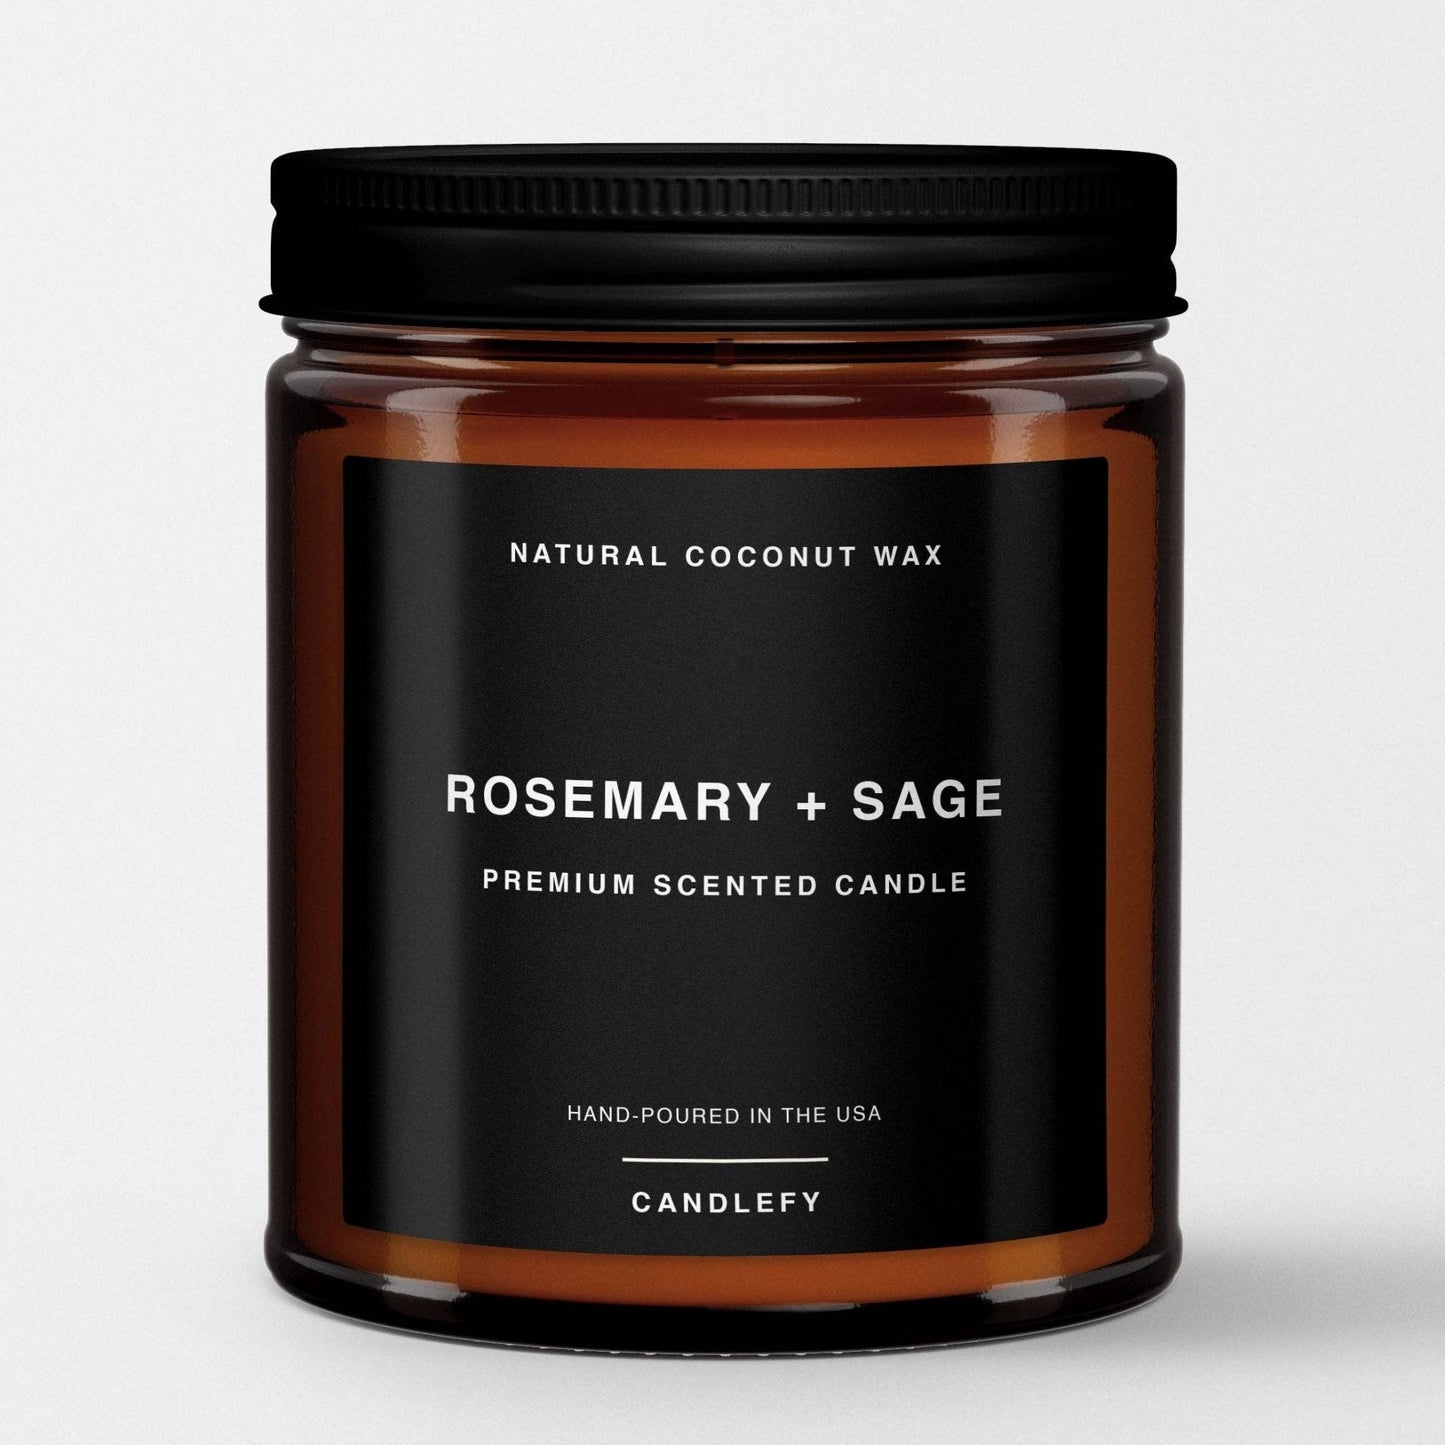 Rosemary + Sage: Premium Scented Candle